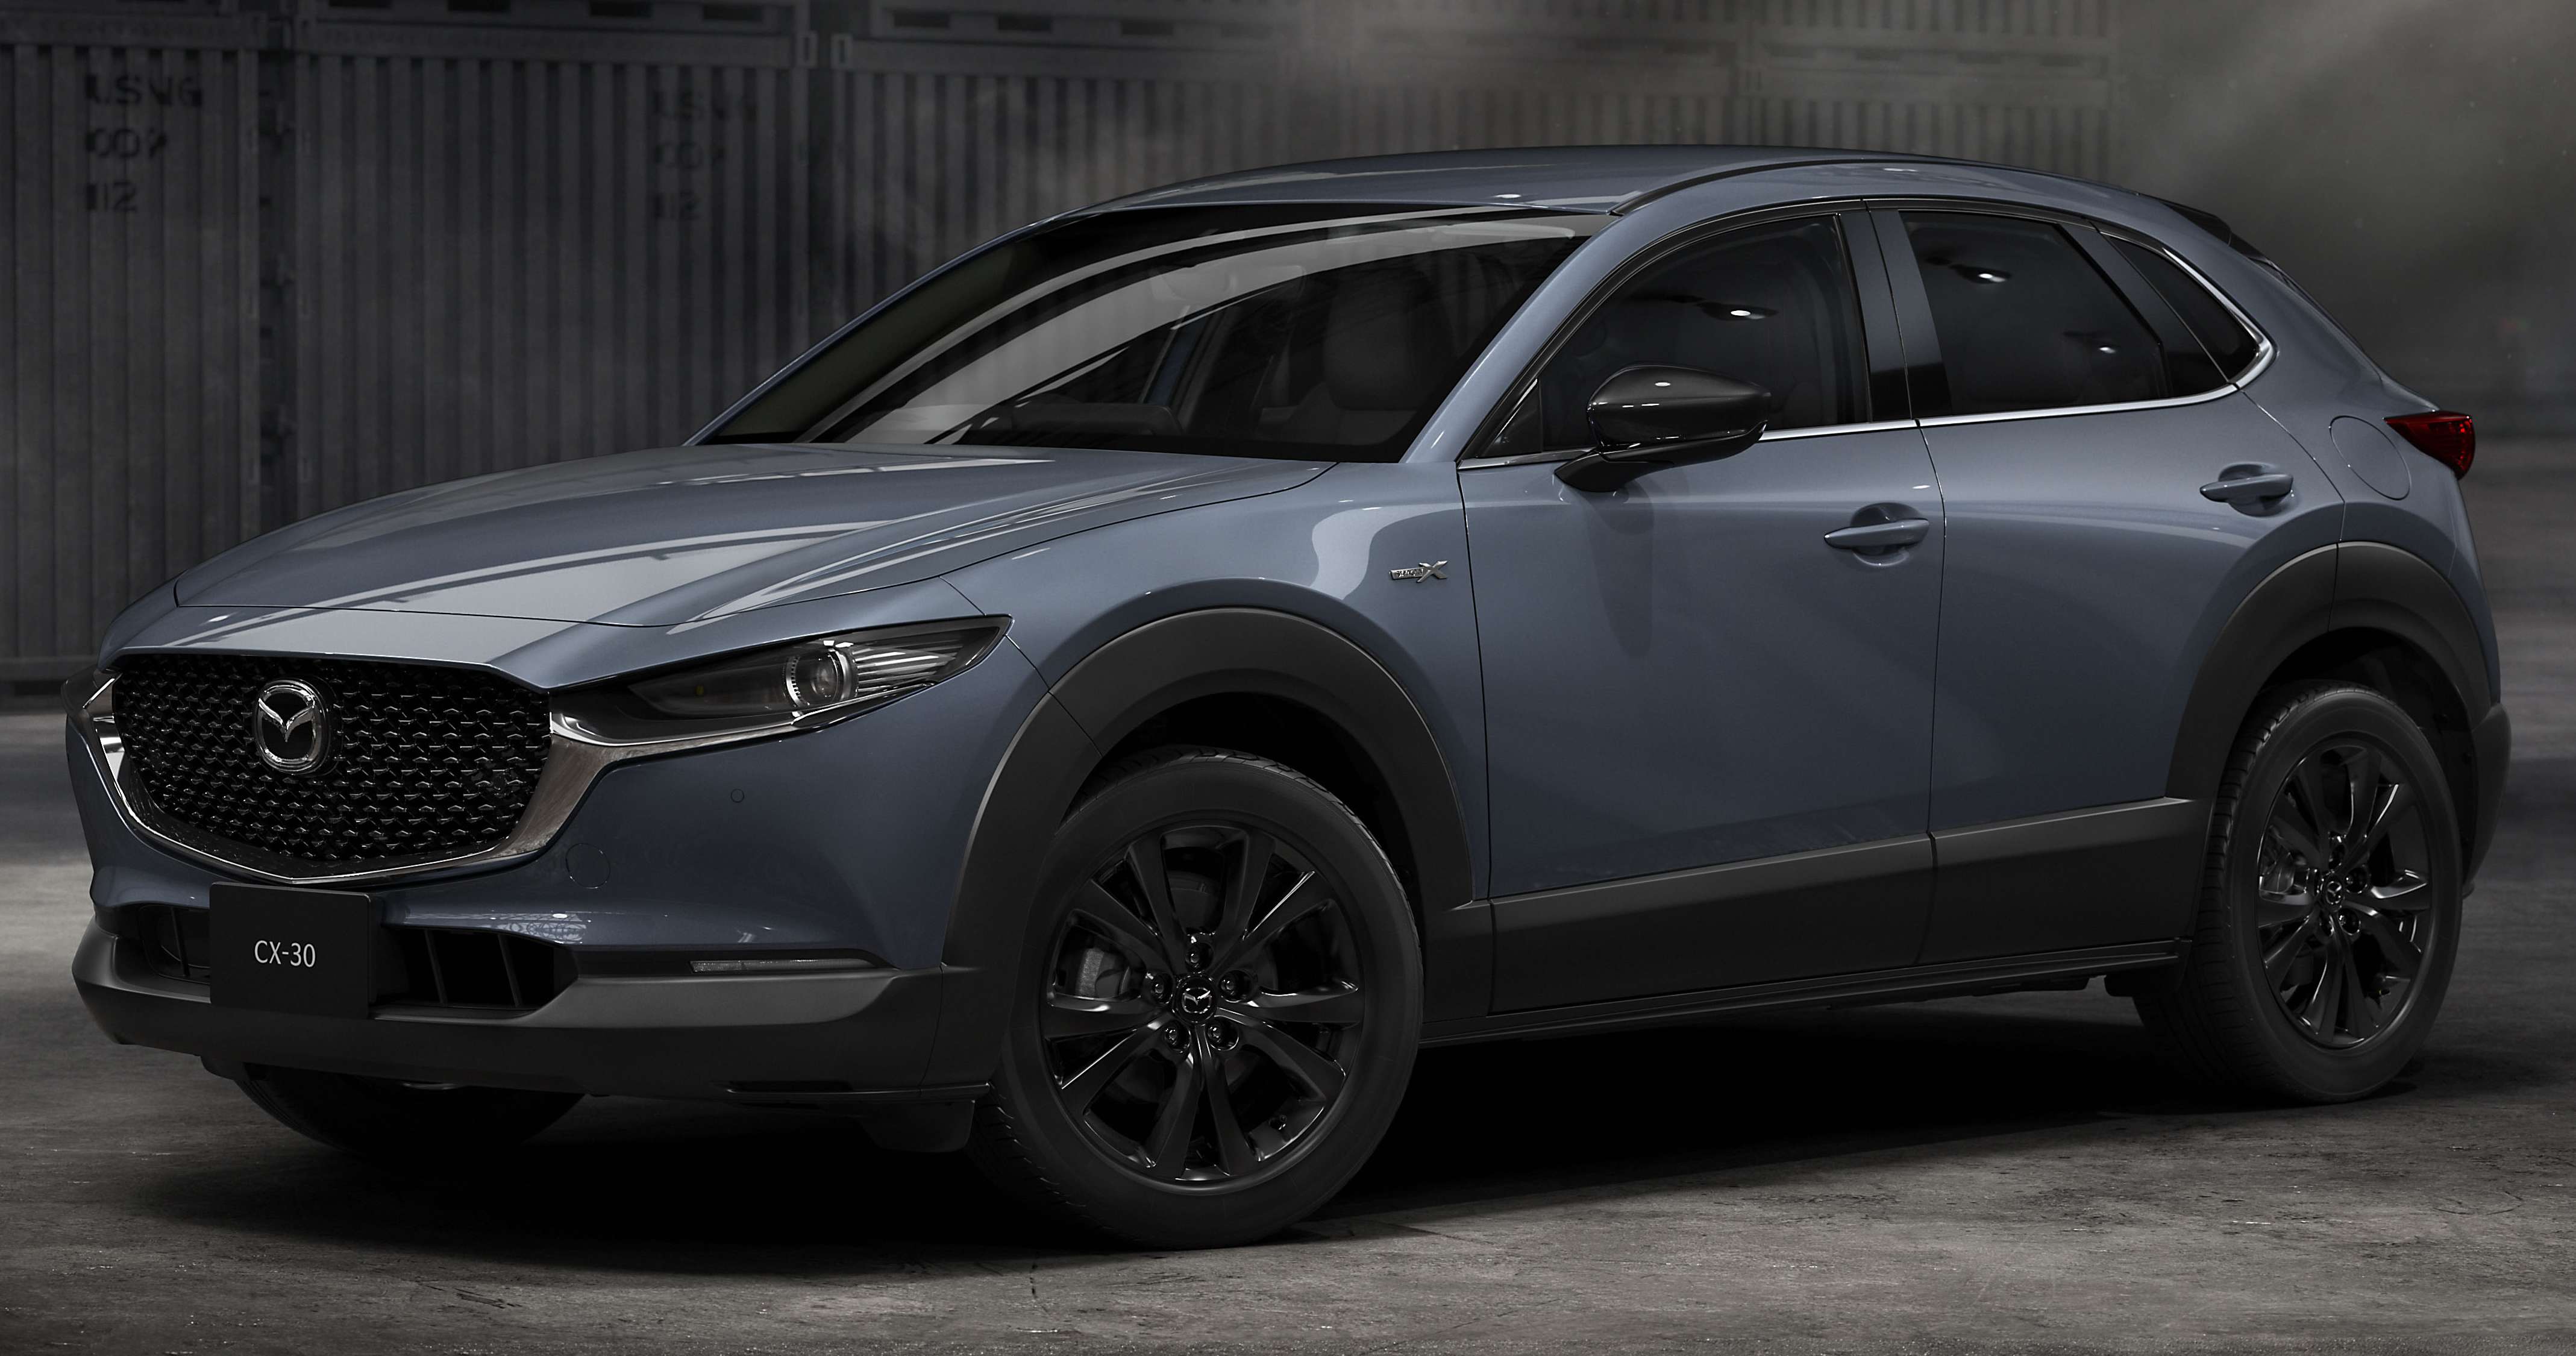 2022 Mazda CX-30 Ignite Edition variants now in Malaysia - from RM169k